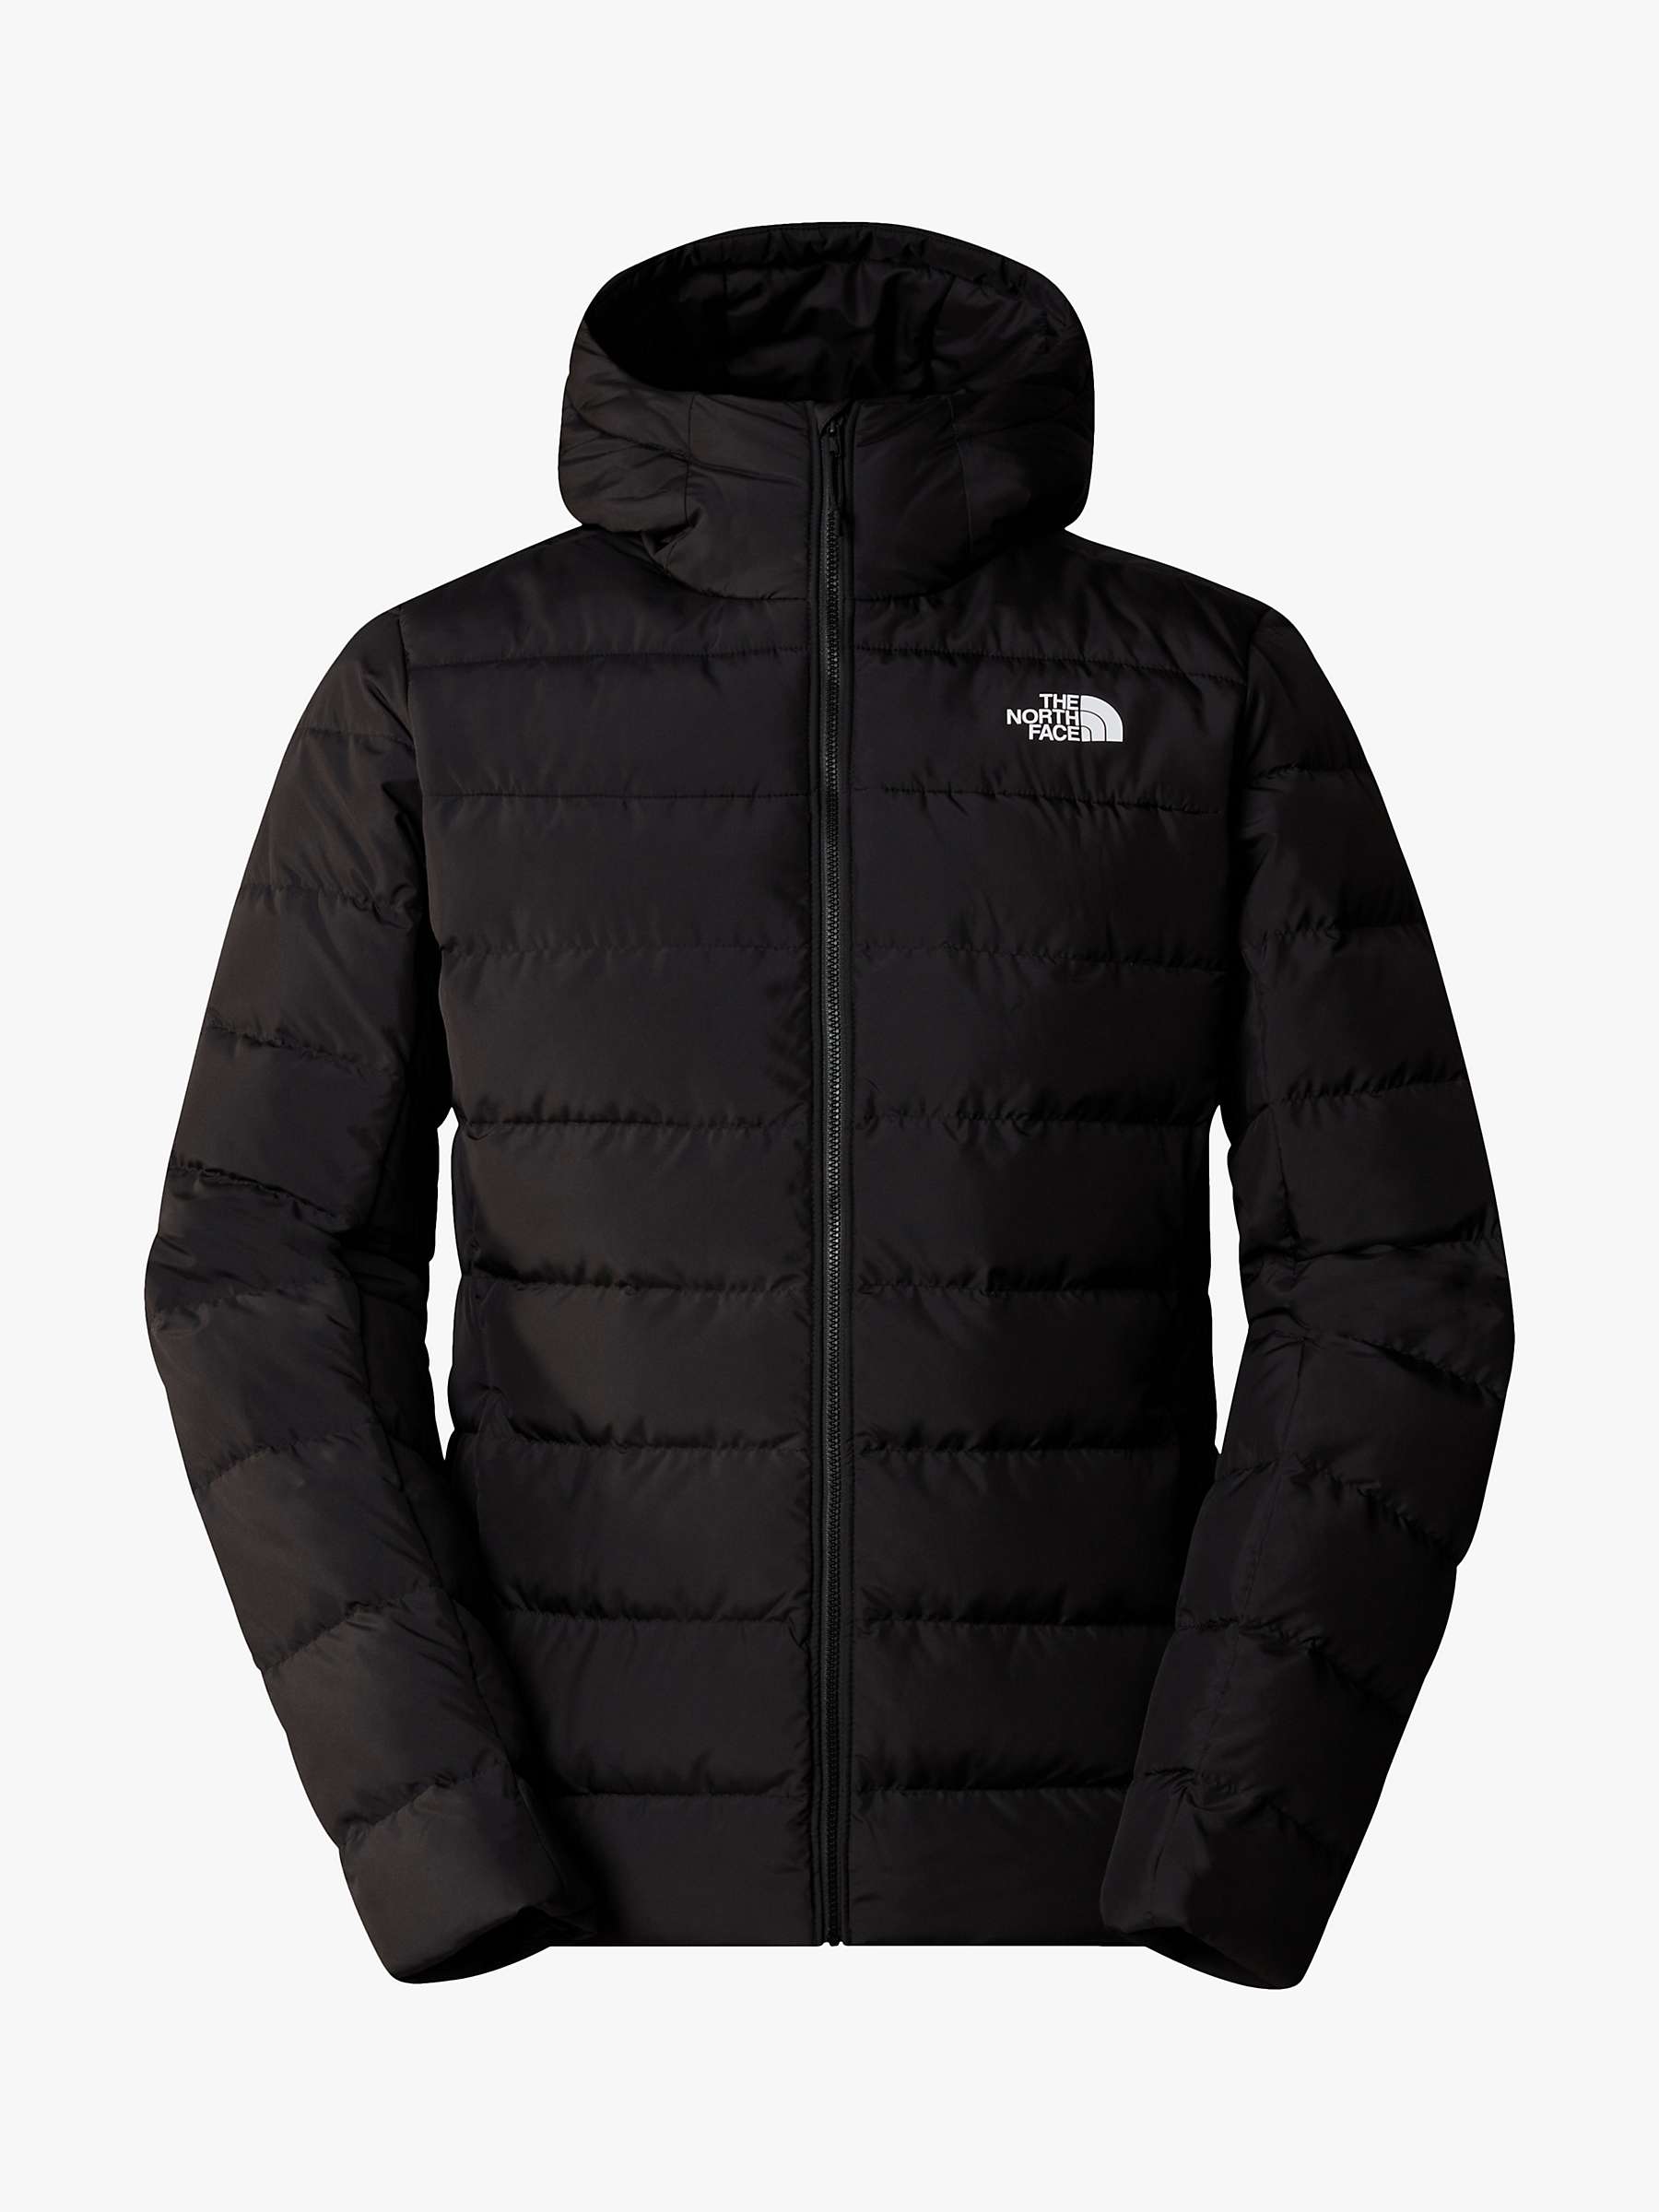 Buy The North Face Aconcagua 3 Men's Down Jacket Online at johnlewis.com